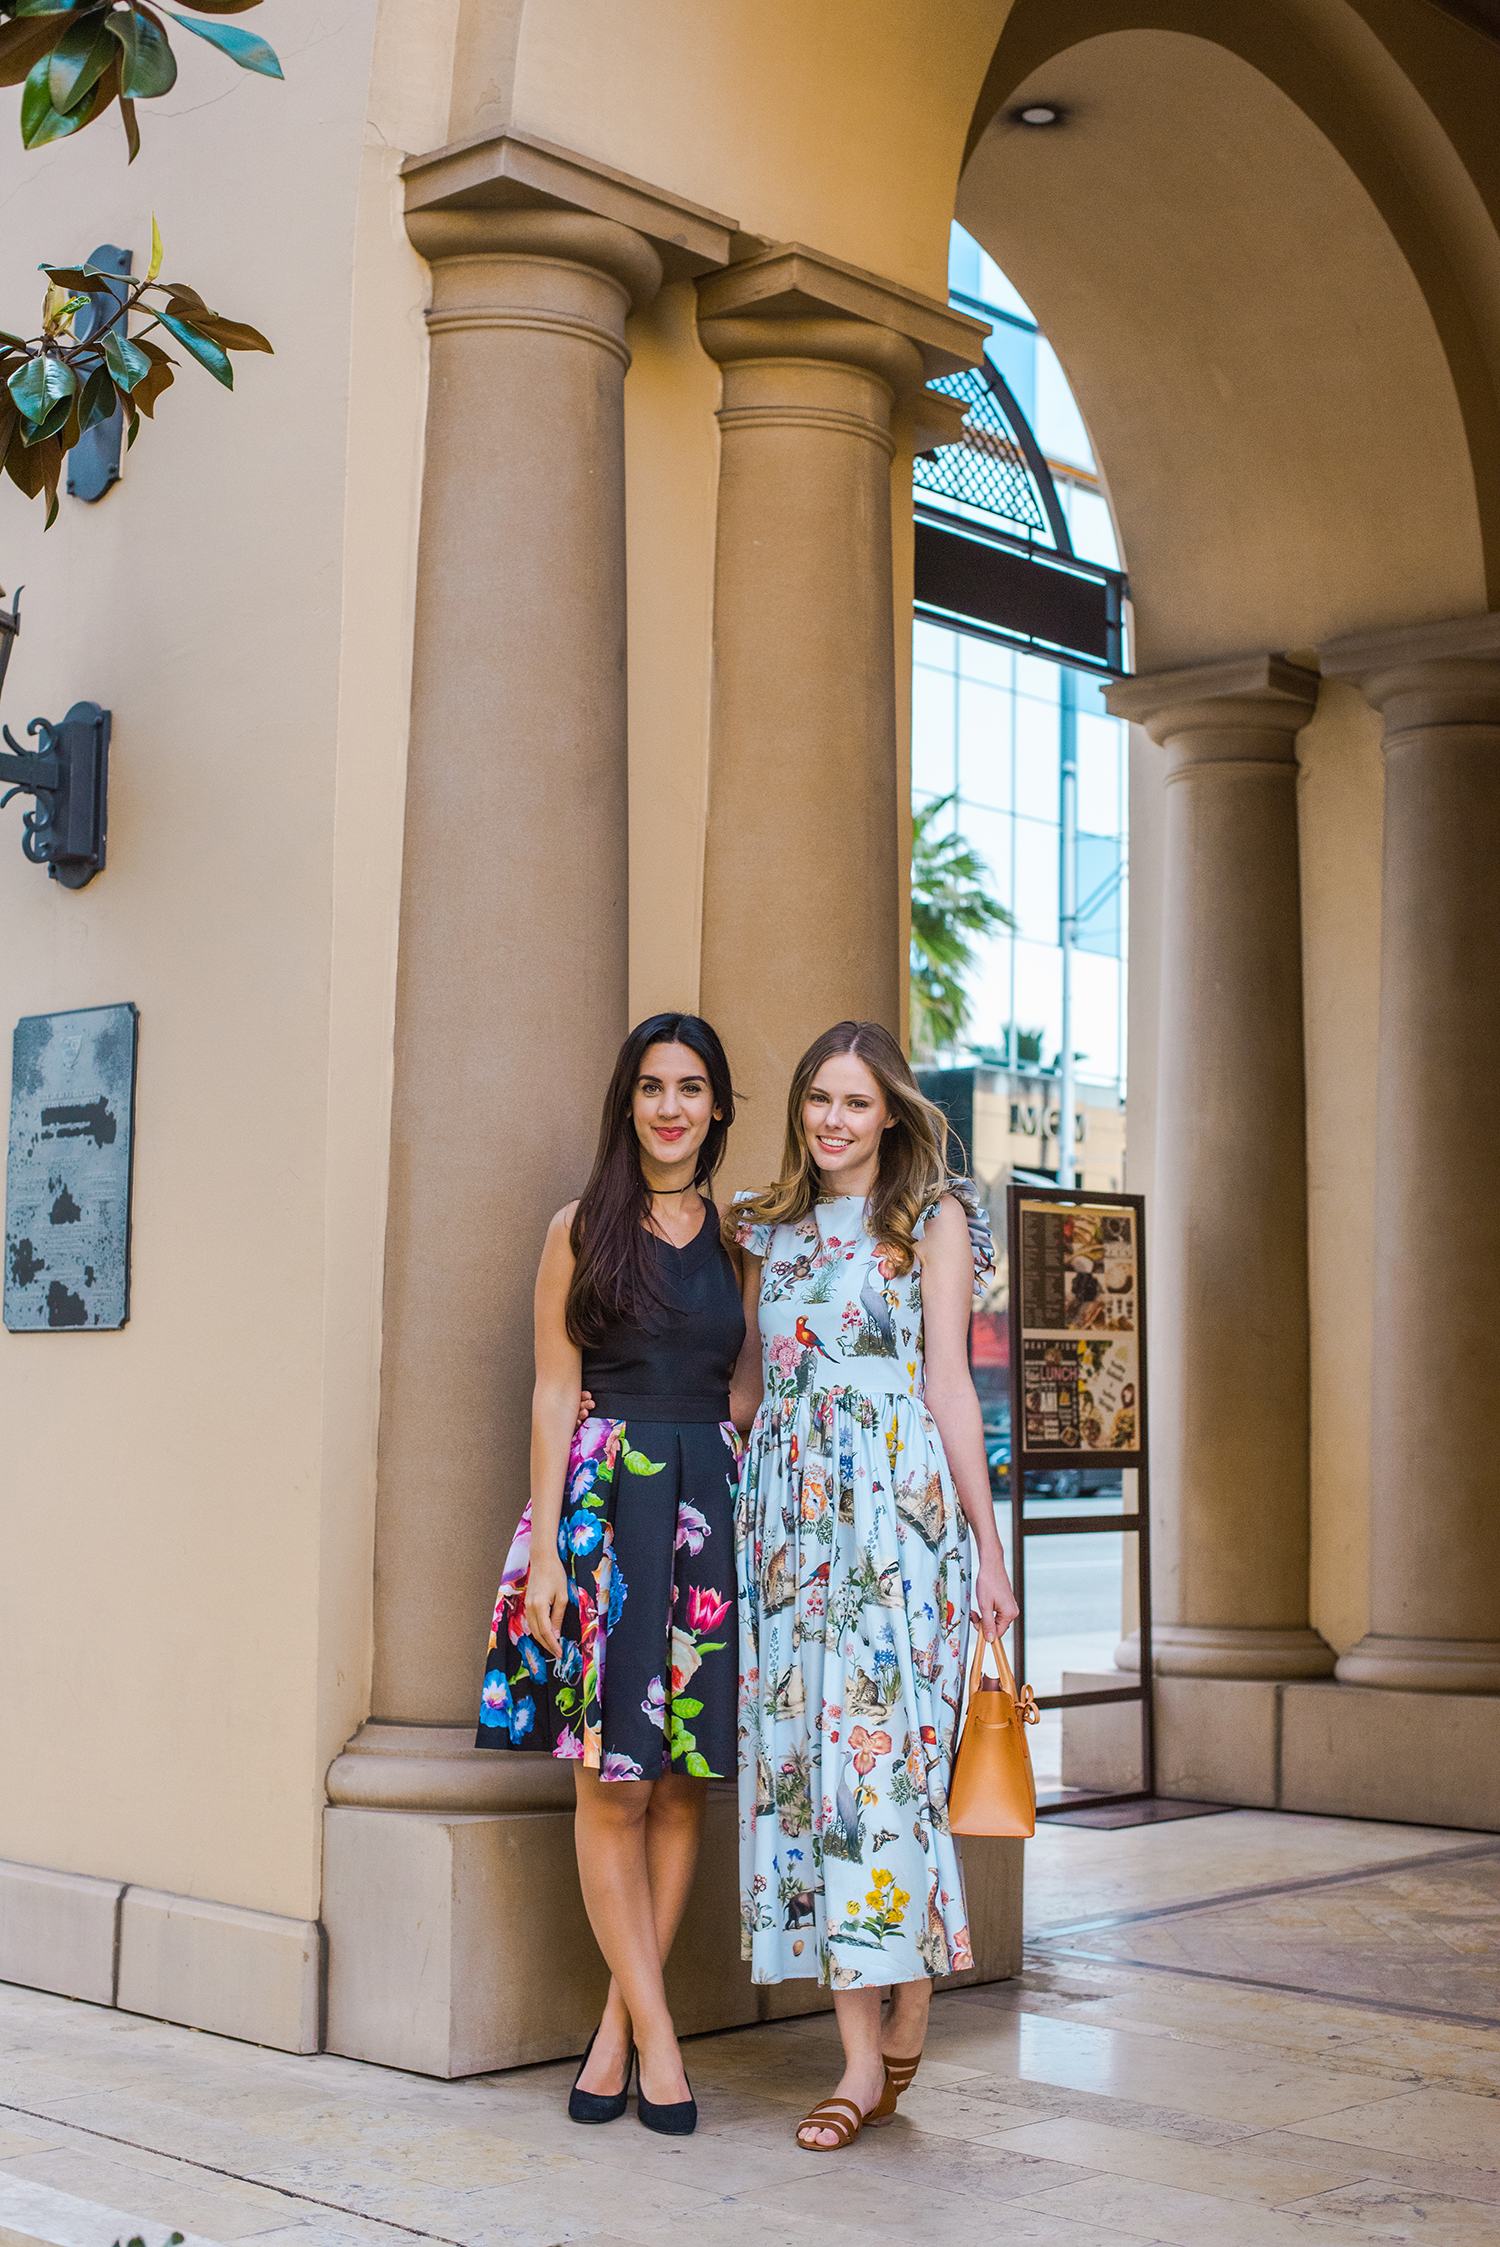 Miss USA 2011 Alyssa Campanella of The A List blog and Natalie Zfat of The Social Co have a girls day out in Beverly Hills